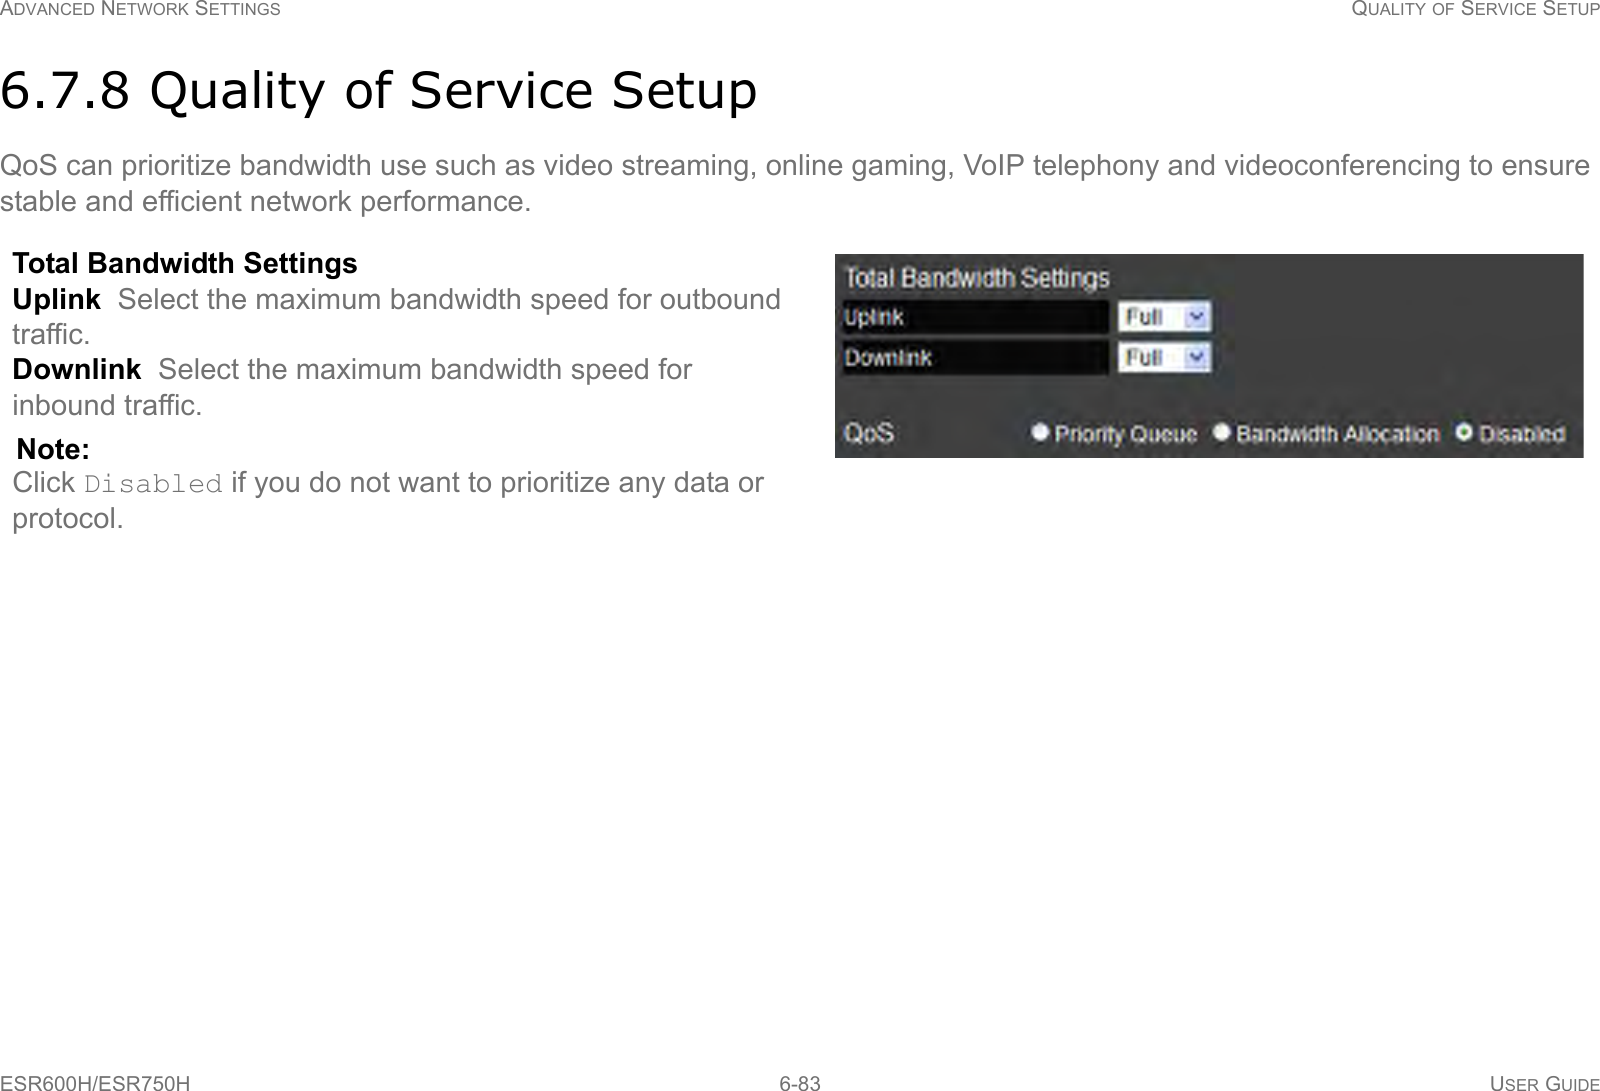 ADVANCED NETWORK SETTINGS QUALITY OF SERVICE SETUPESR600H/ESR750H 6-83 USER GUIDE6.7.8 Quality of Service SetupQoS can prioritize bandwidth use such as video streaming, online gaming, VoIP telephony and videoconferencing to ensure stable and efficient network performance.Total Bandwidth Settings Uplink  Select the maximum bandwidth speed for outbound traffic.Downlink  Select the maximum bandwidth speed for inbound traffic.Note:Click Disabled if you do not want to prioritize any data or protocol. 